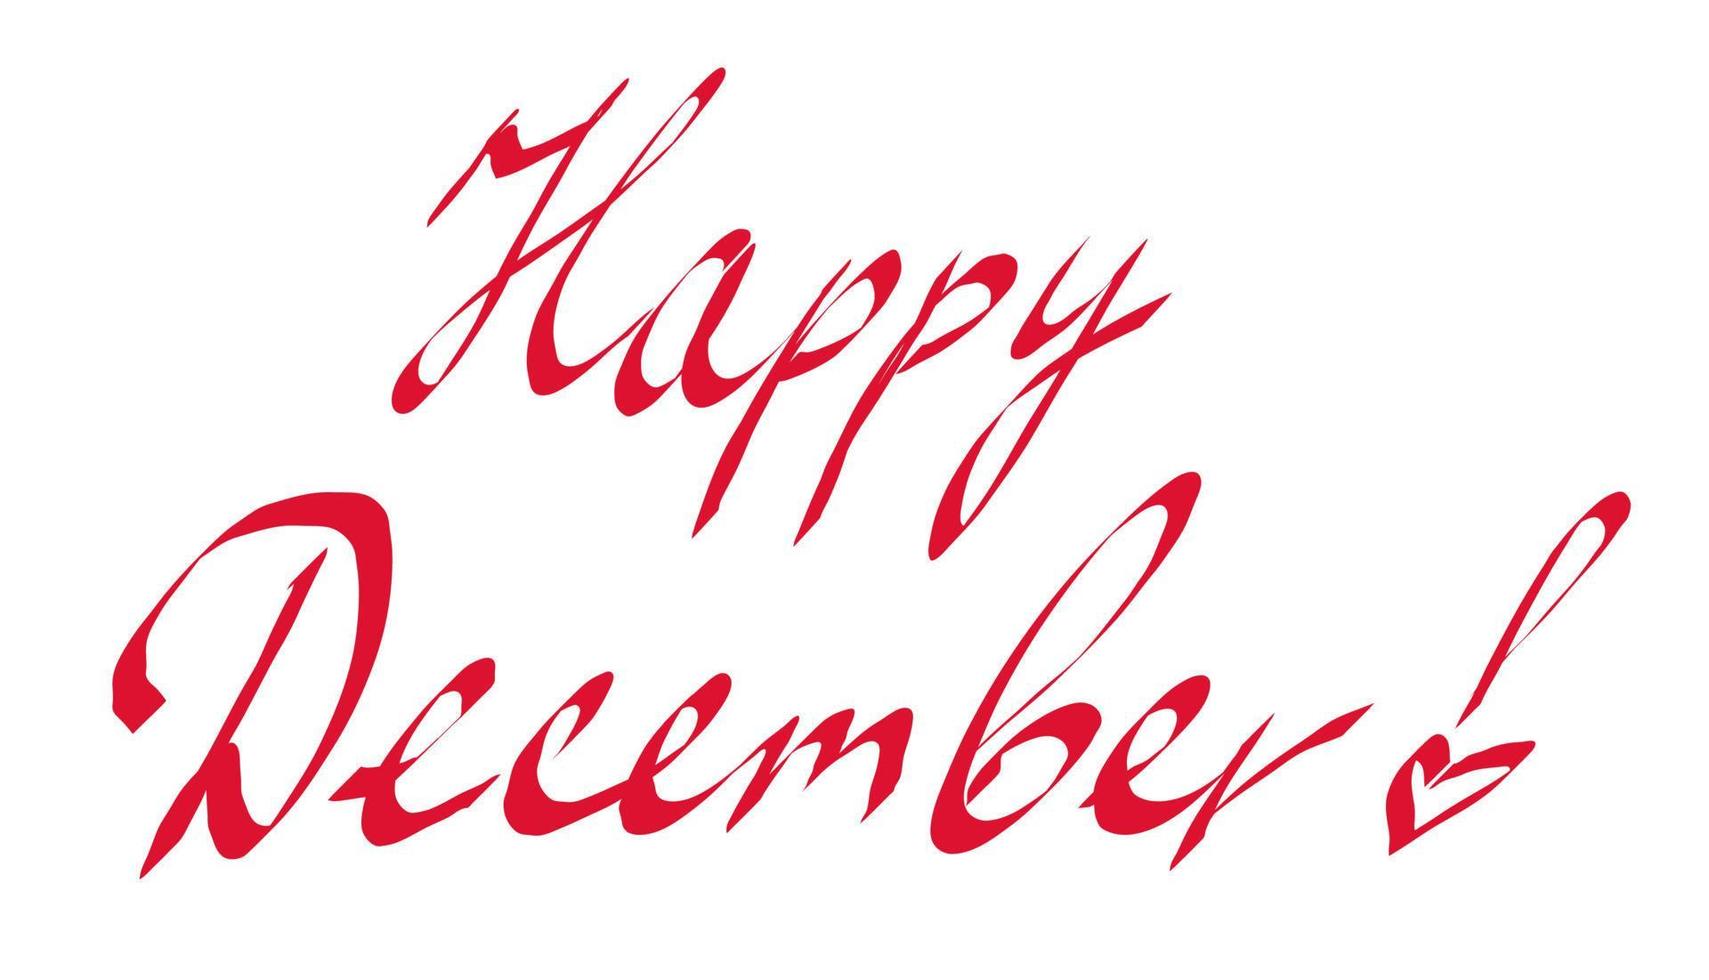 Happy December Cursive Calligraphy red Color Text On White Background. Happy December lettering vector illustration. Handwritten text isolated on white. Hand drawn message. Celebrate greeting.